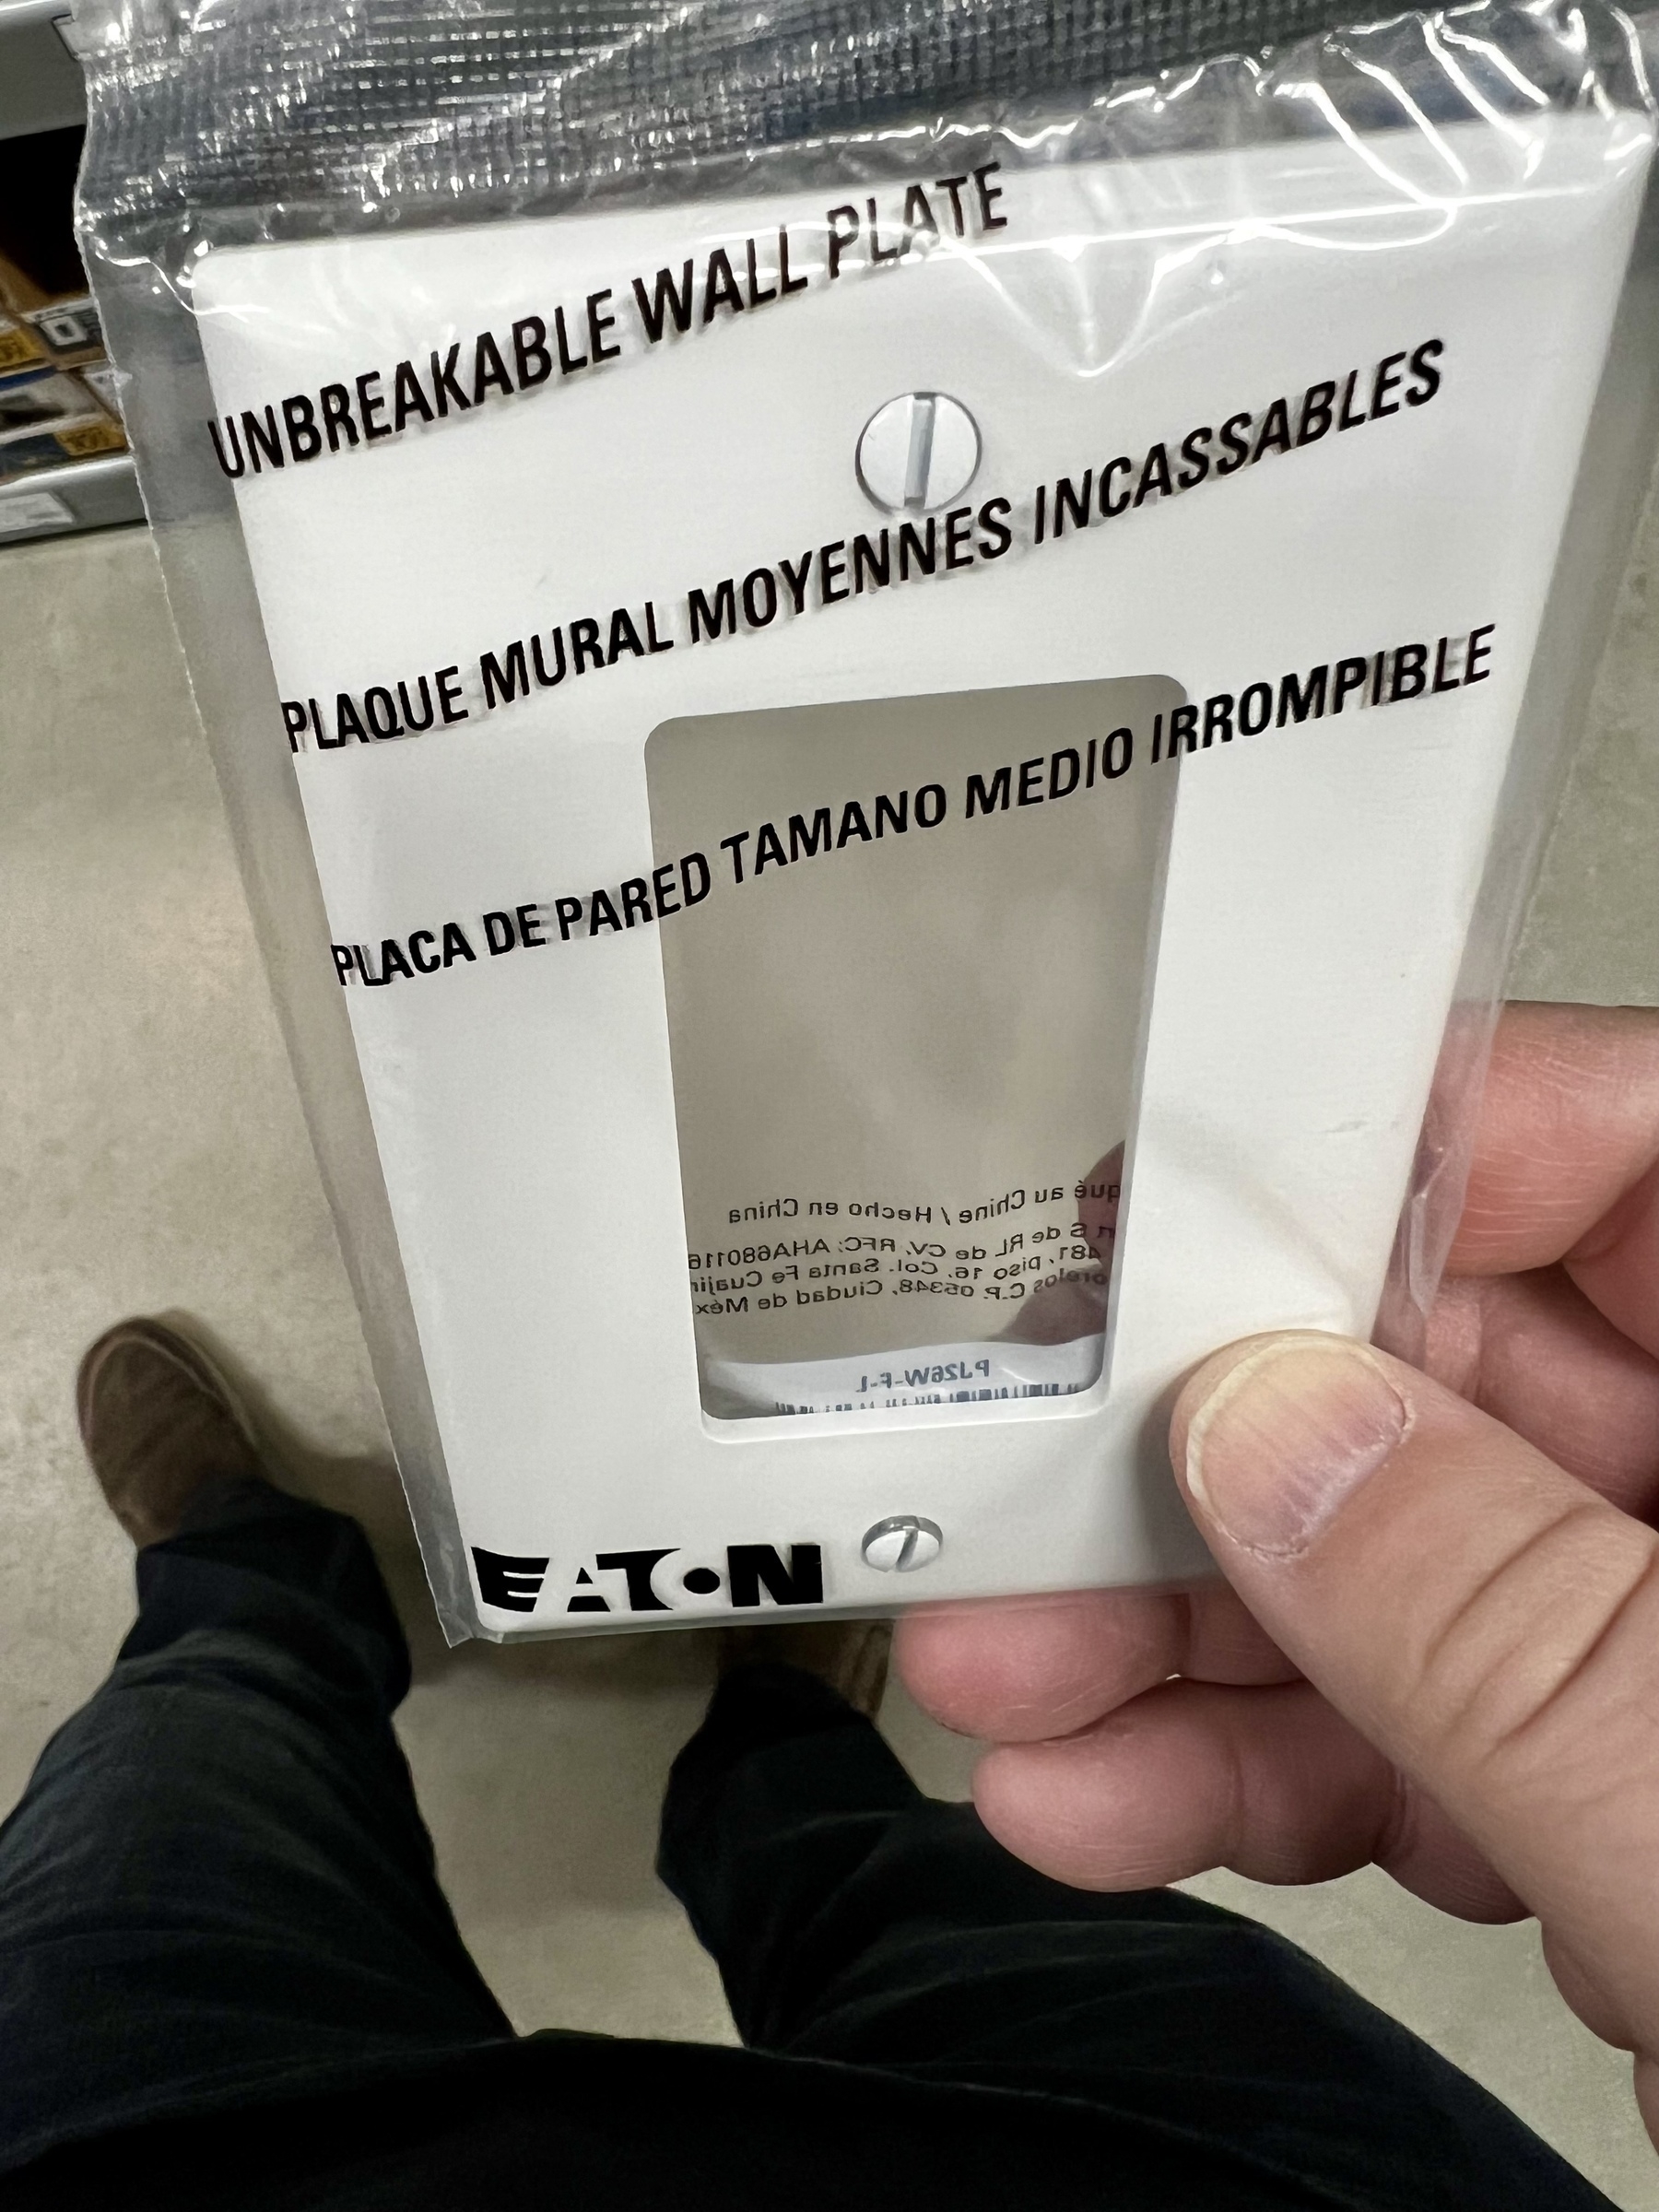 A light switch face plate with “unbreakable” on the packaging.